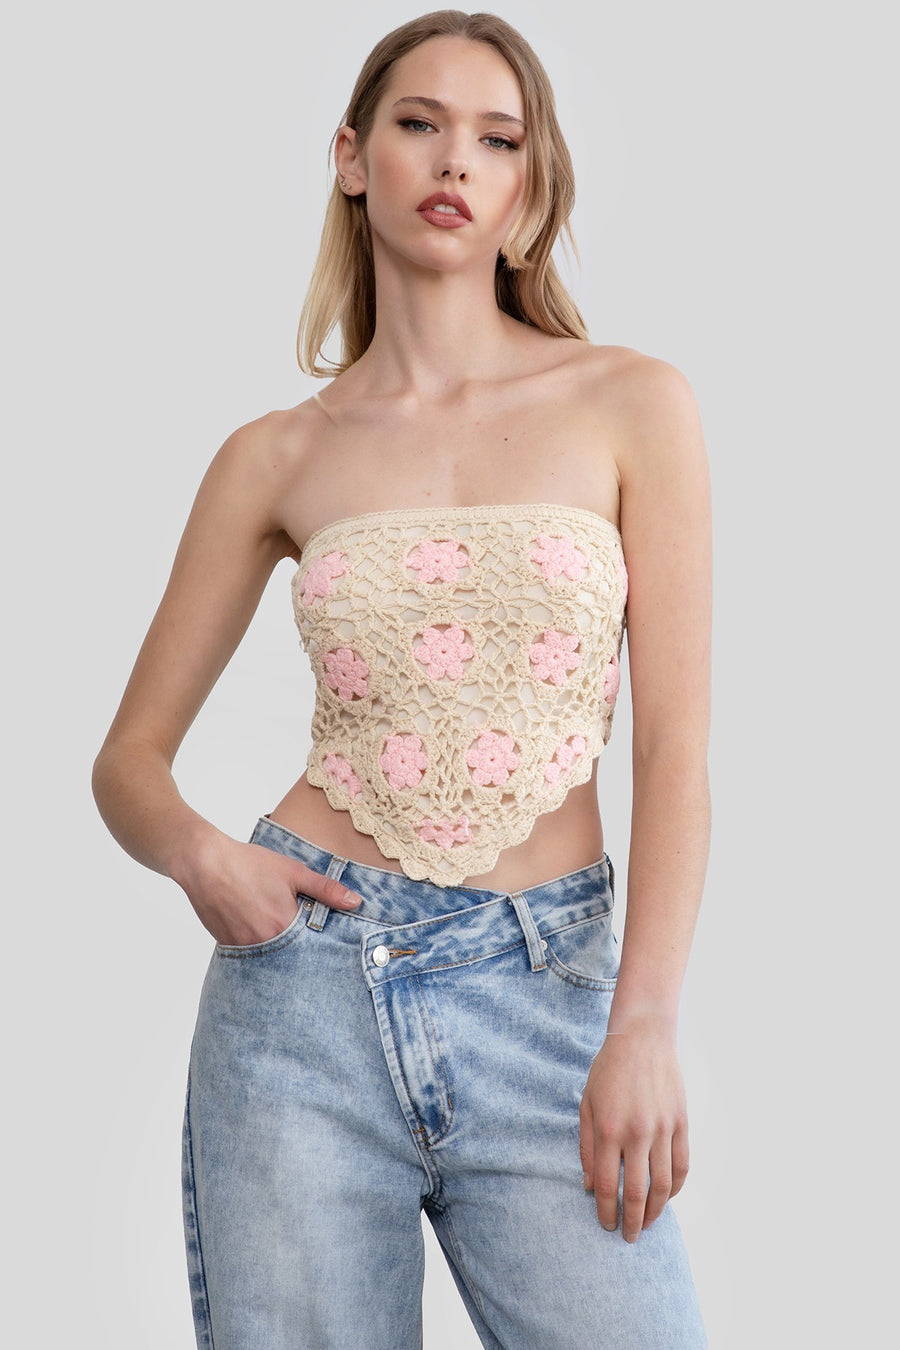 Featuring a flower pattern strapless crochet top with a lace up back and an Asymetrical hem in the color natural with pink flowers 